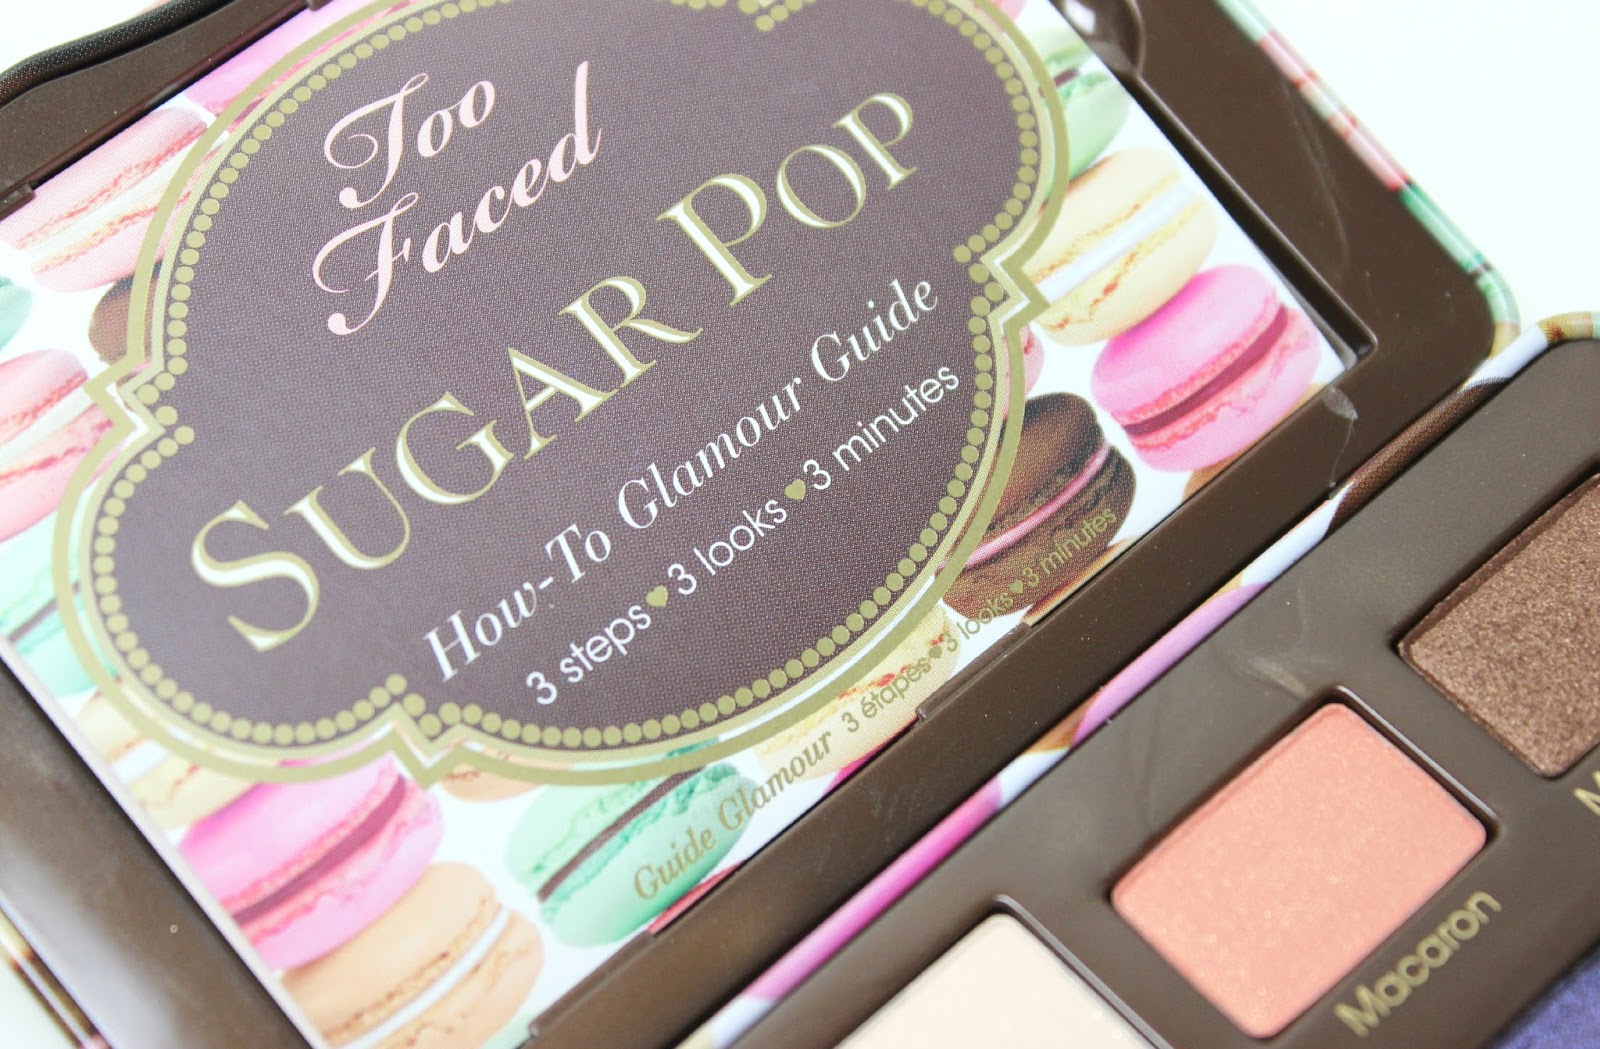 A picture of Too Faced Sugar Pop Sugary Sweet Eye Shadow Collection